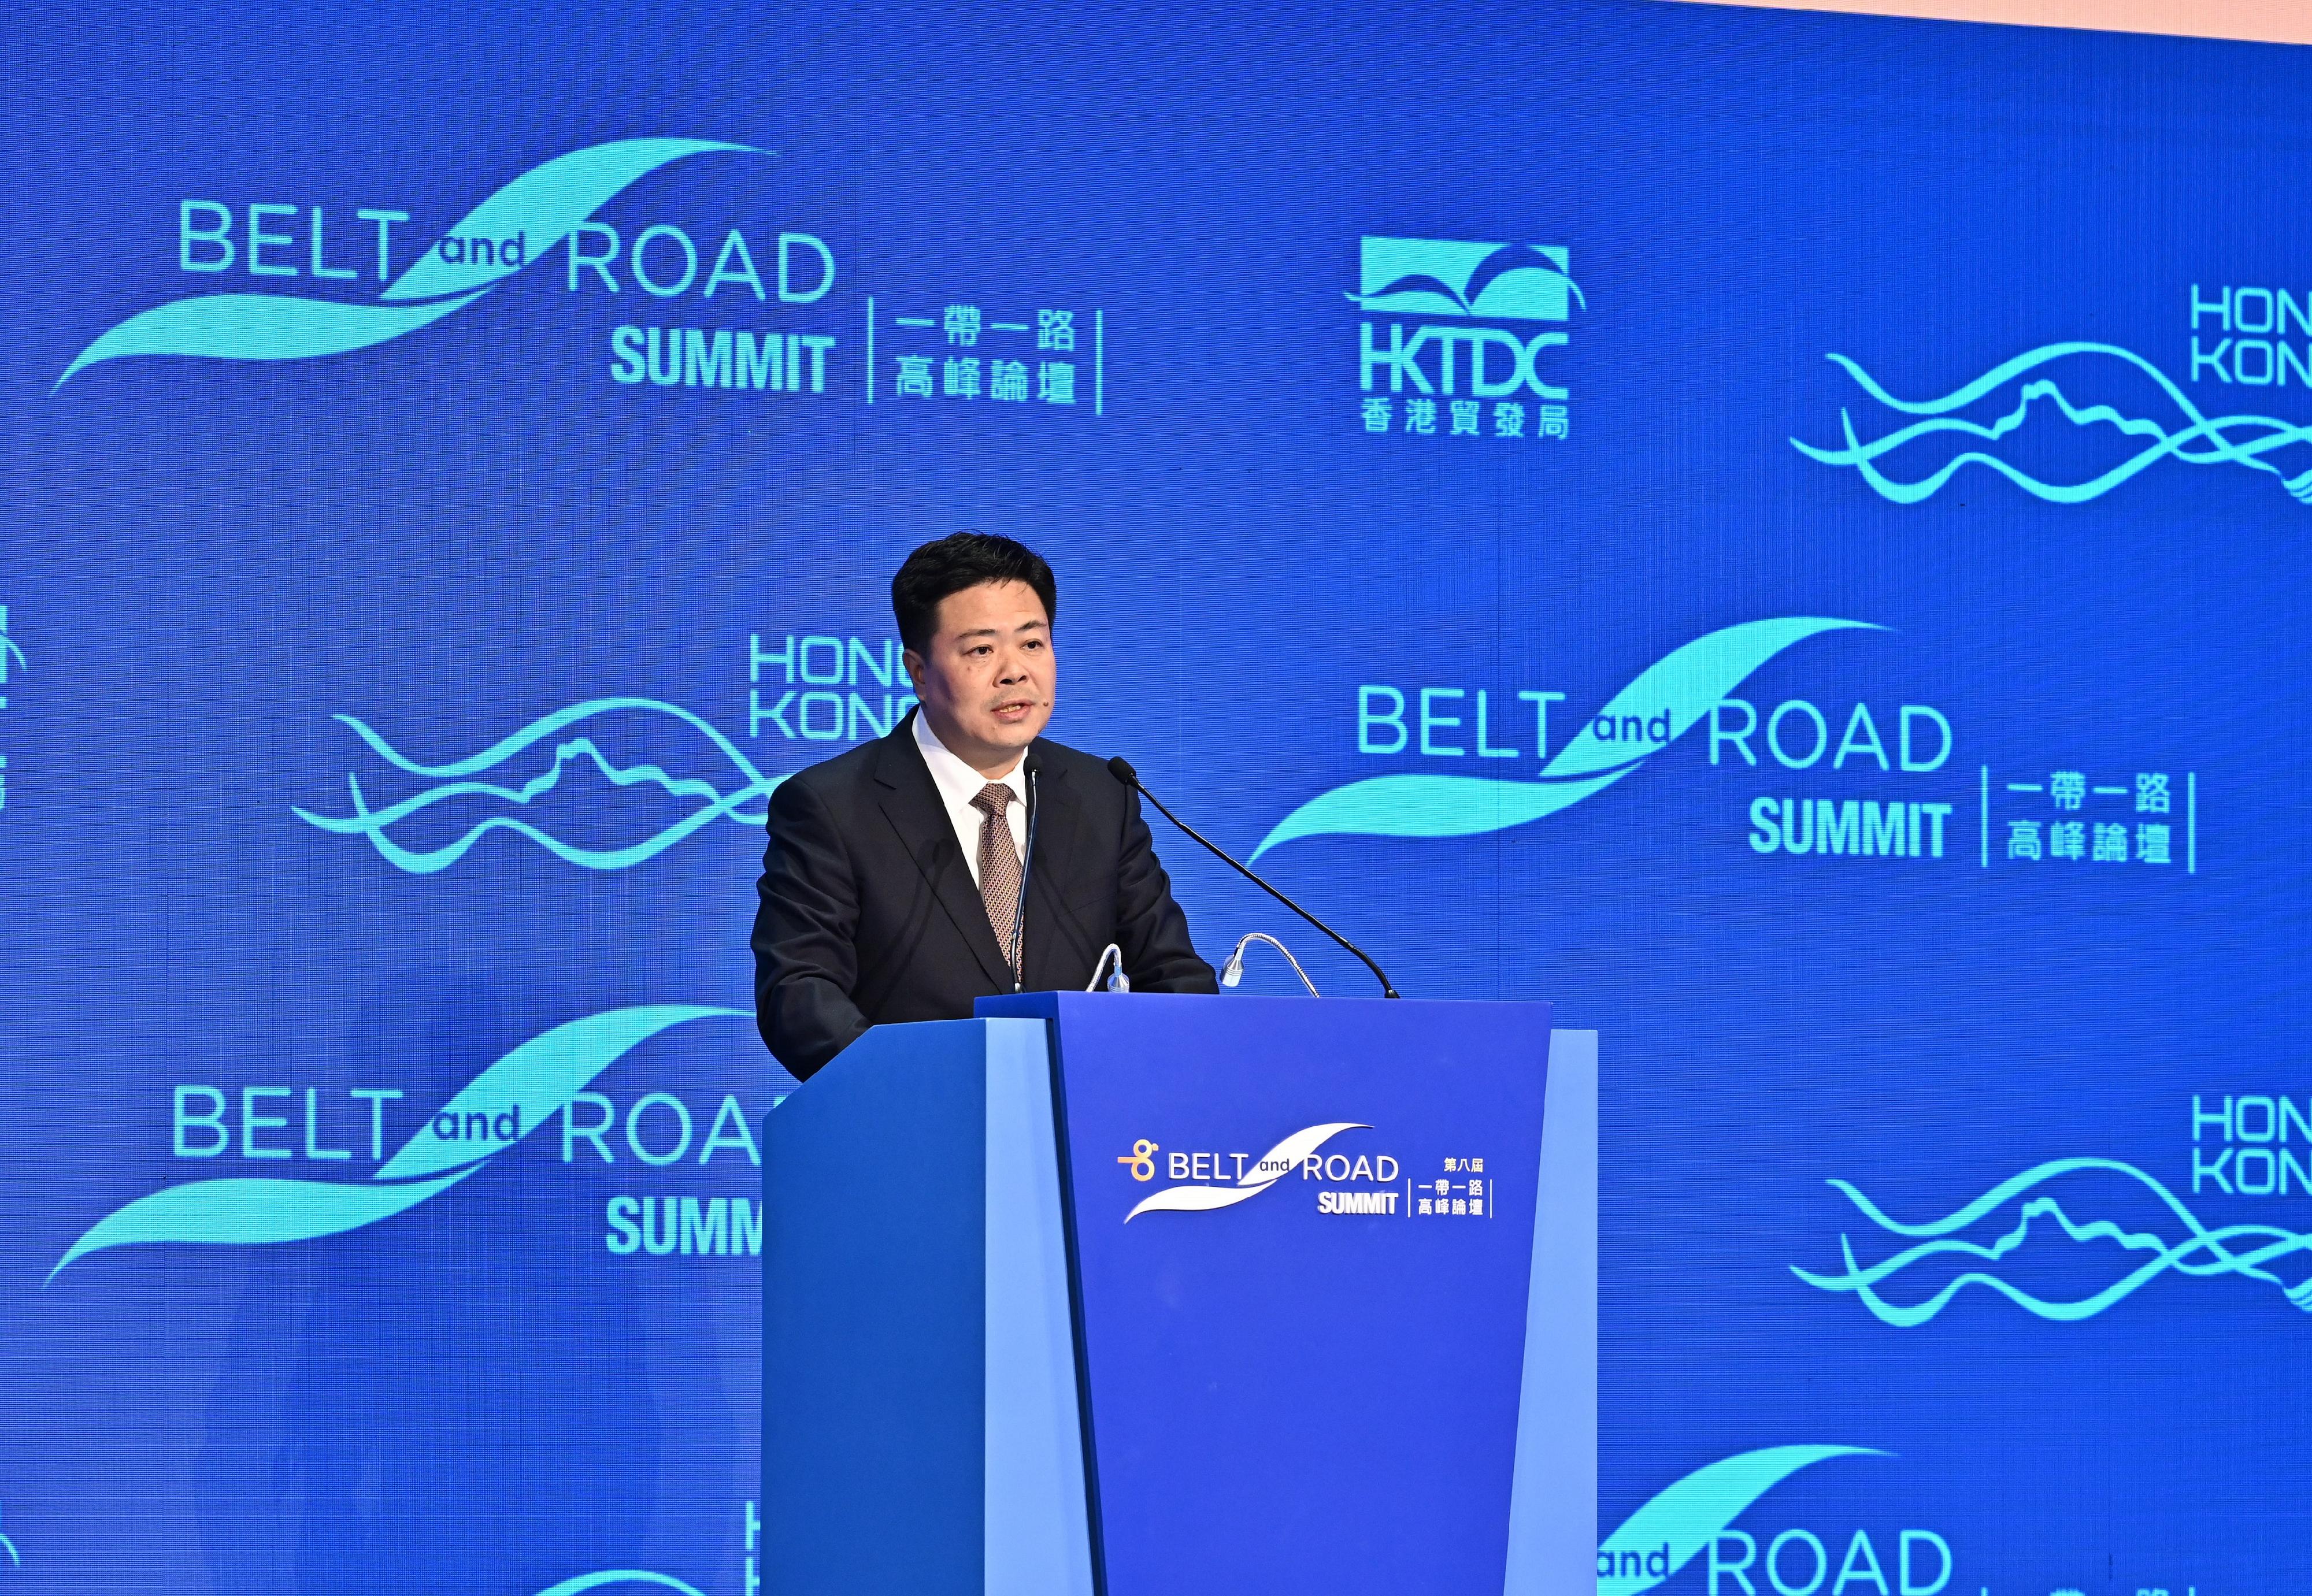 The eighth Belt and Road Summit opened today (September 13). Deputy Secretary General of the National Development and Reform Commission Mr Xiao Weiming delivered a speech at the opening session this morning.
